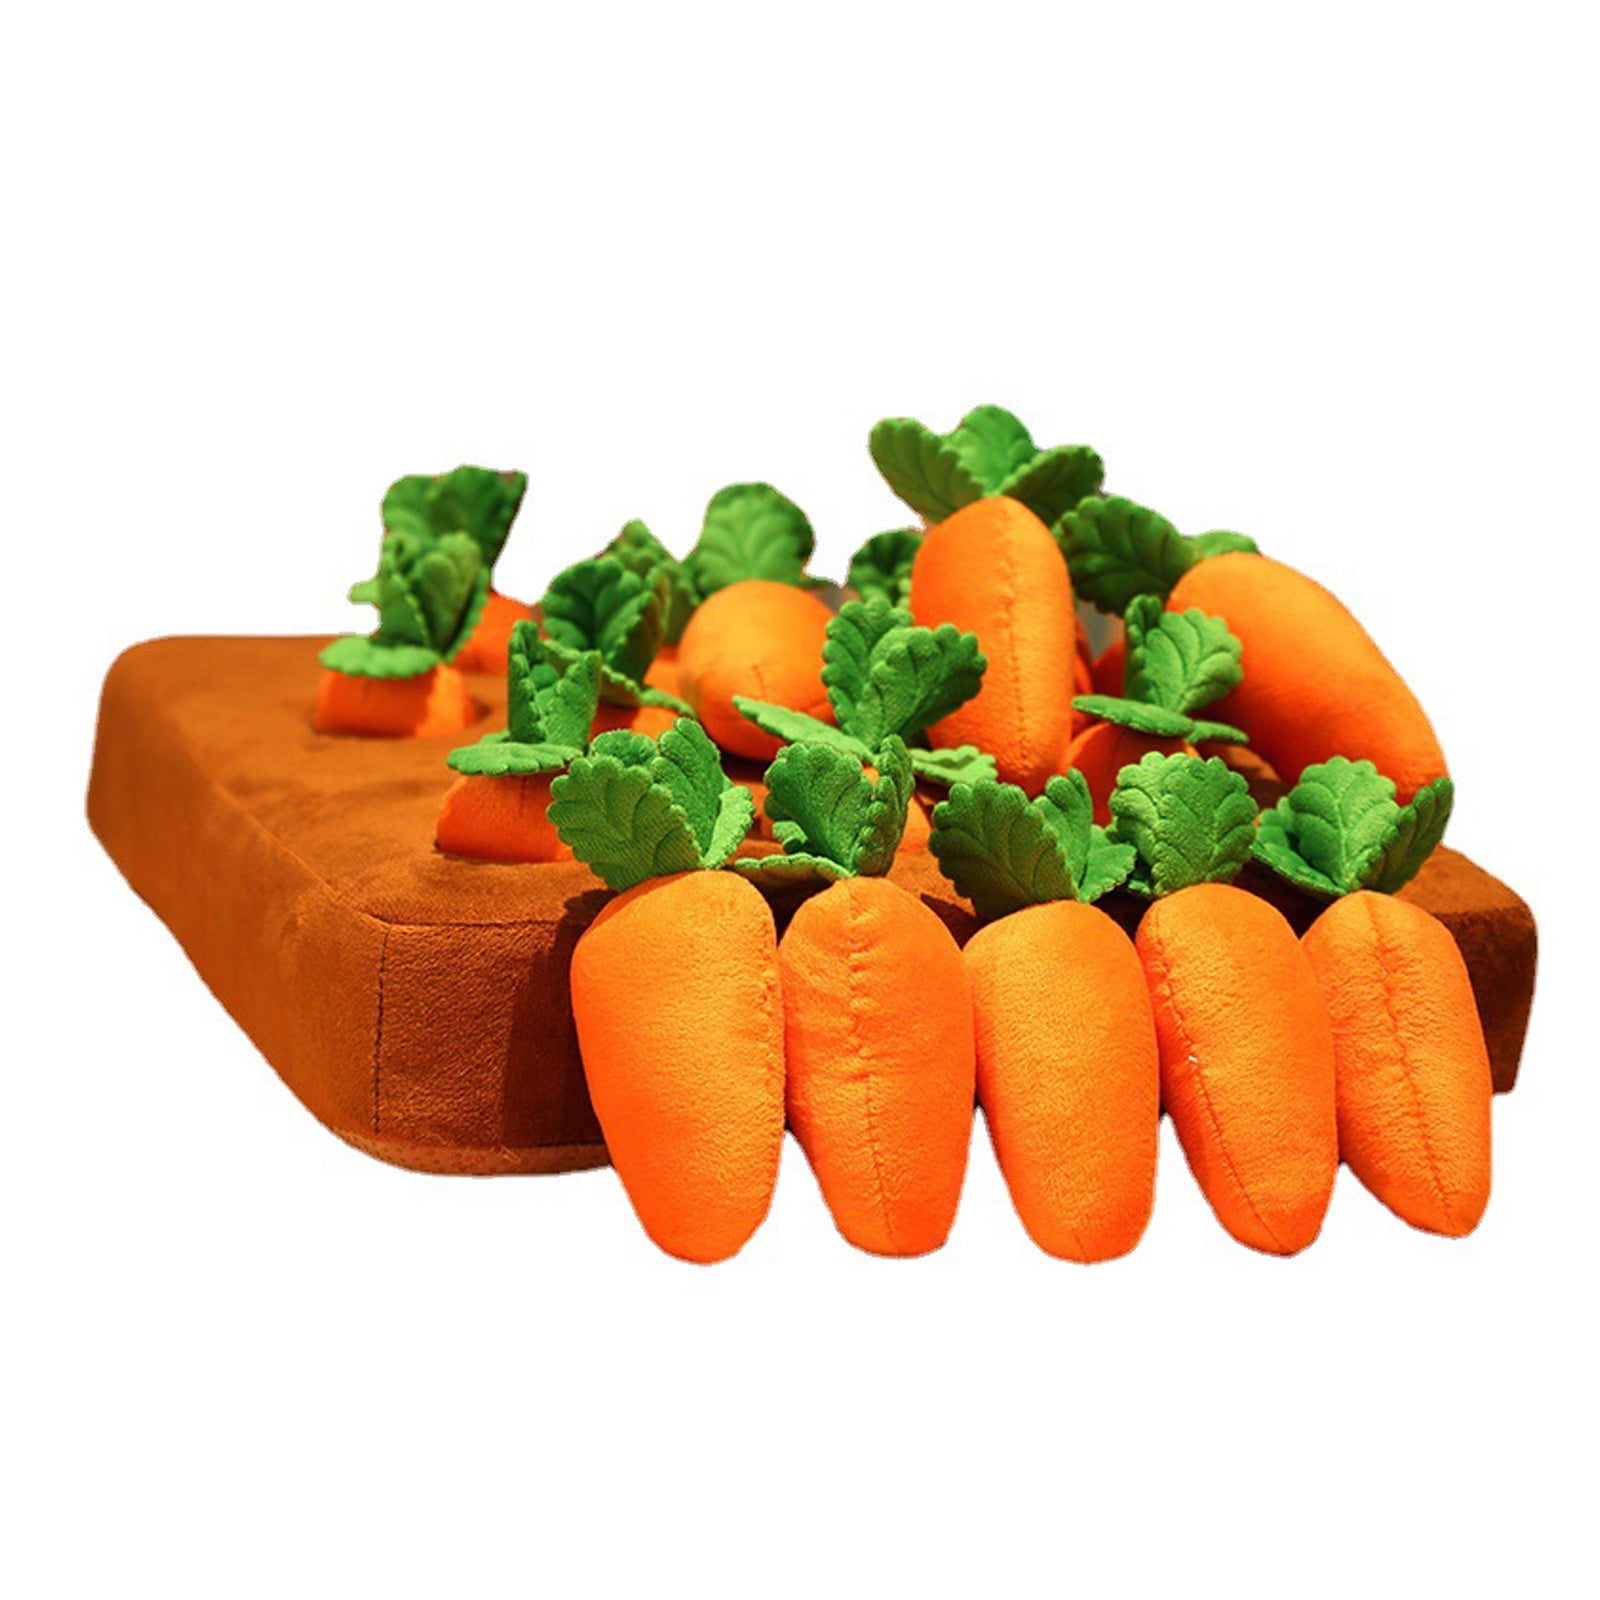 Carrot Dog Toy,Hide and Seek Carrot Farm Dog Toys,Dog Interactive Toys w 12  Squeaky Carrots,Pet Snuffle Mat Dog Carrot Chewing Toys, Interactive IQ Tr  for Sale in Upland, CA - OfferUp